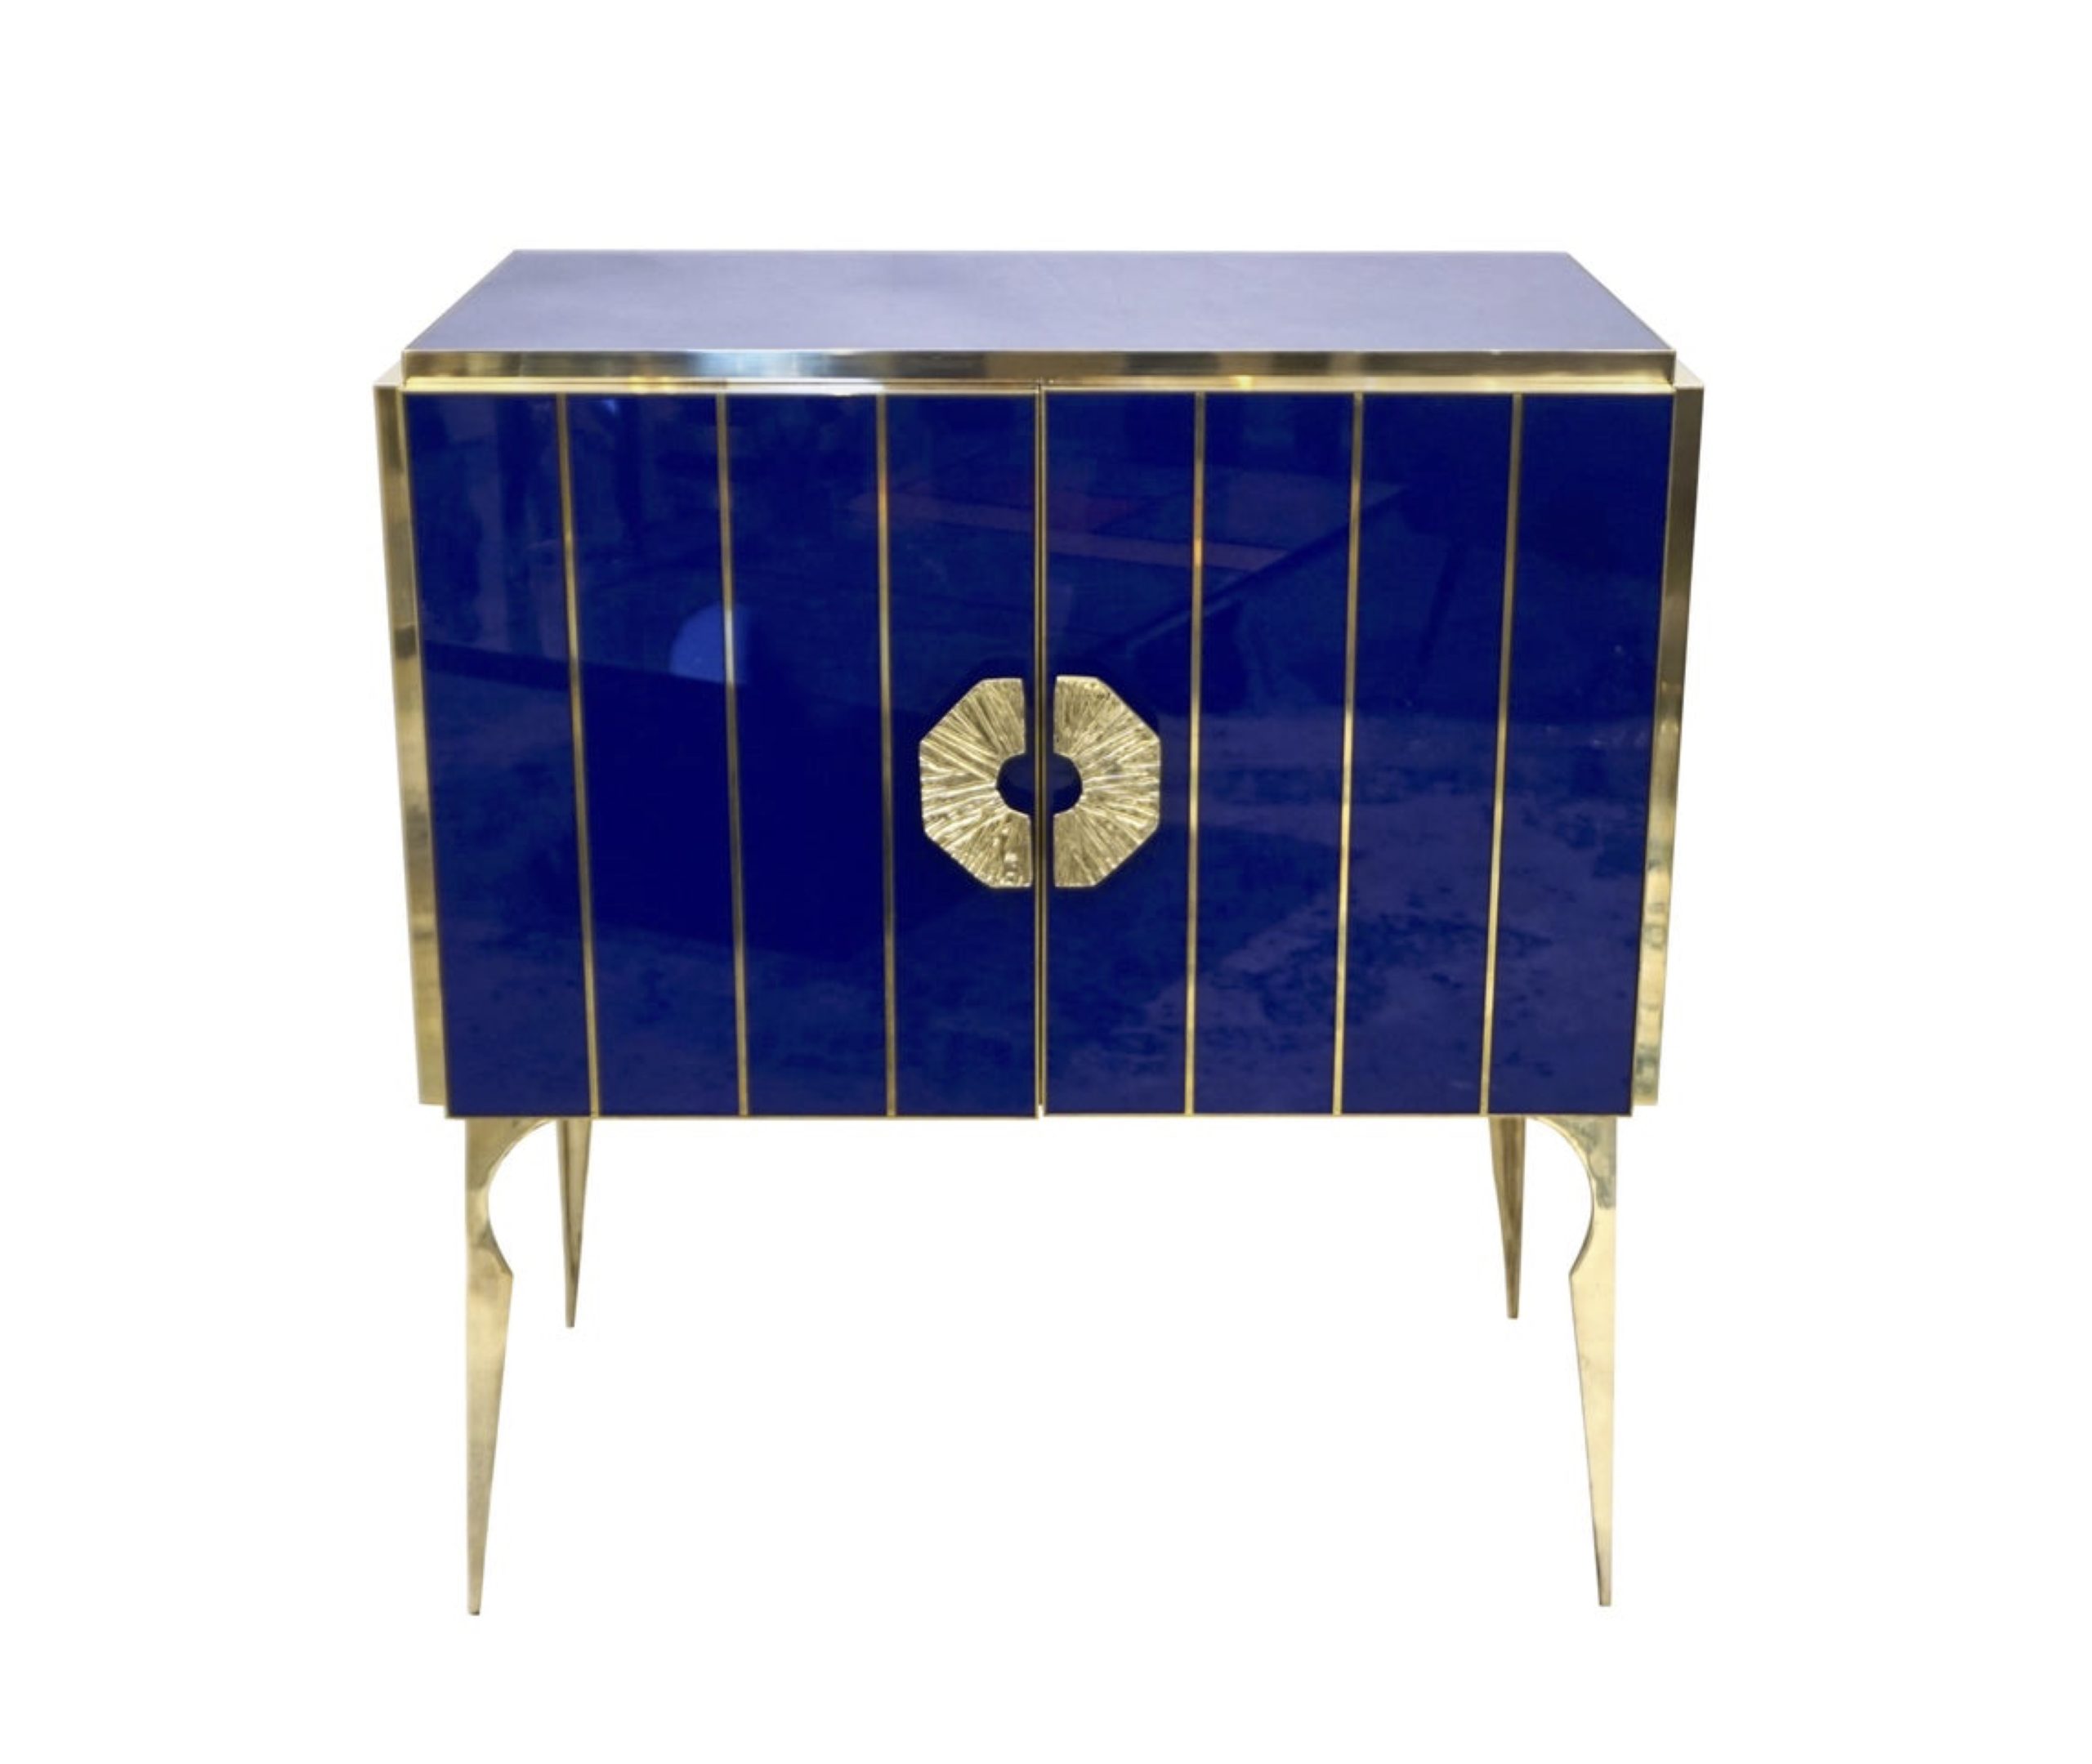 MAIN_cosulich_interiors_and_antiques_products_new_york_design_center_blue_cabinet_21087312_master-scaled-1